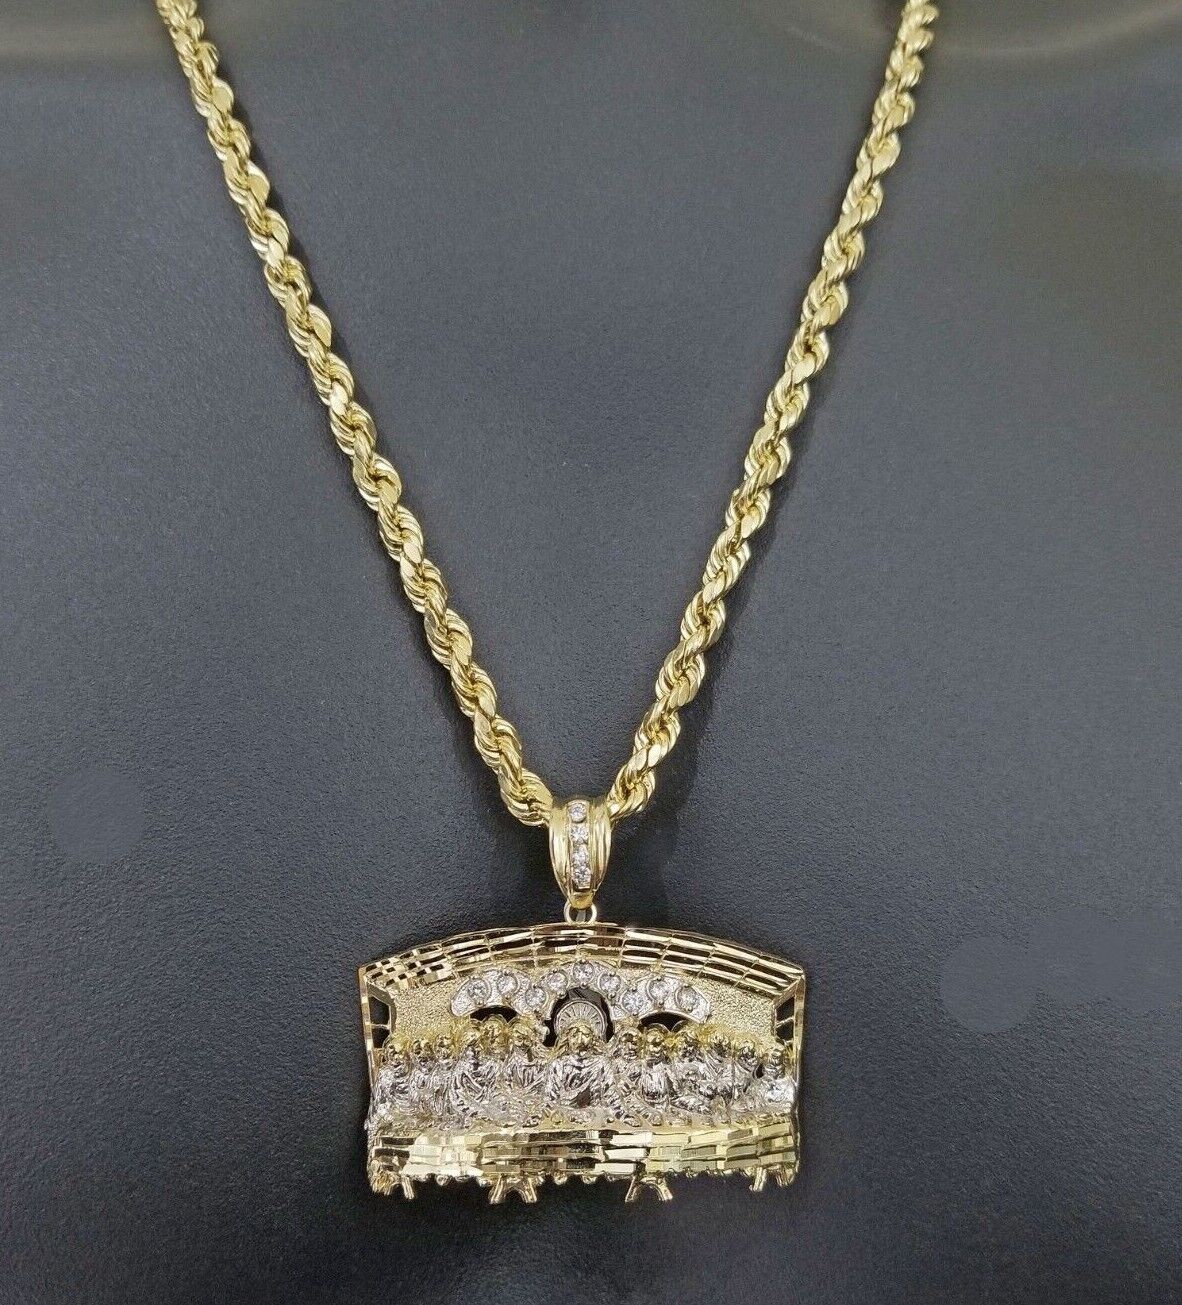 Wholesale Hip Hop Mens 24 Twist Chain Necklace With Cubic Zircon Music Head  And Microphone Gold Pendant For Men From Chrisl, $10.7 | DHgate.Com